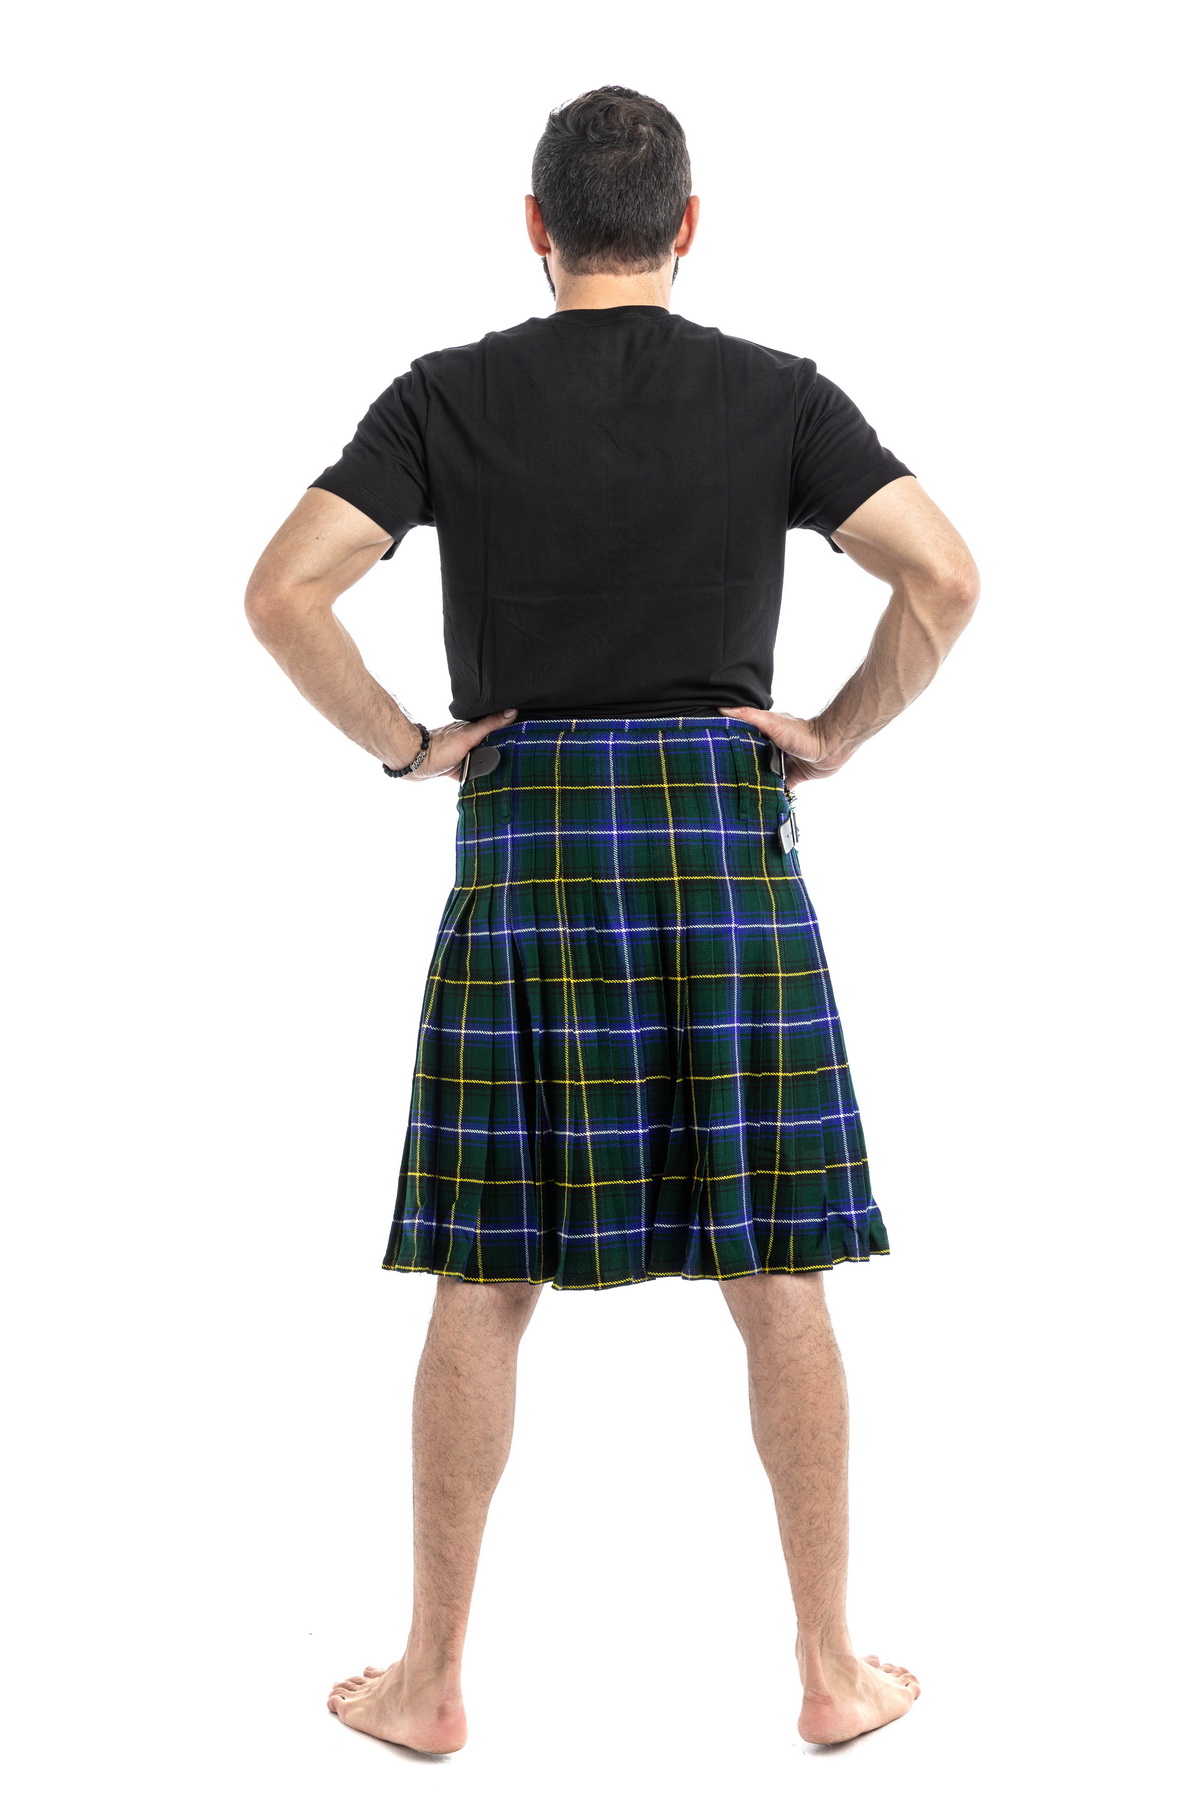 Henderson Weathered 8 Yard Wool Made in Scotland Kilt Only £299 All Sizes £199 